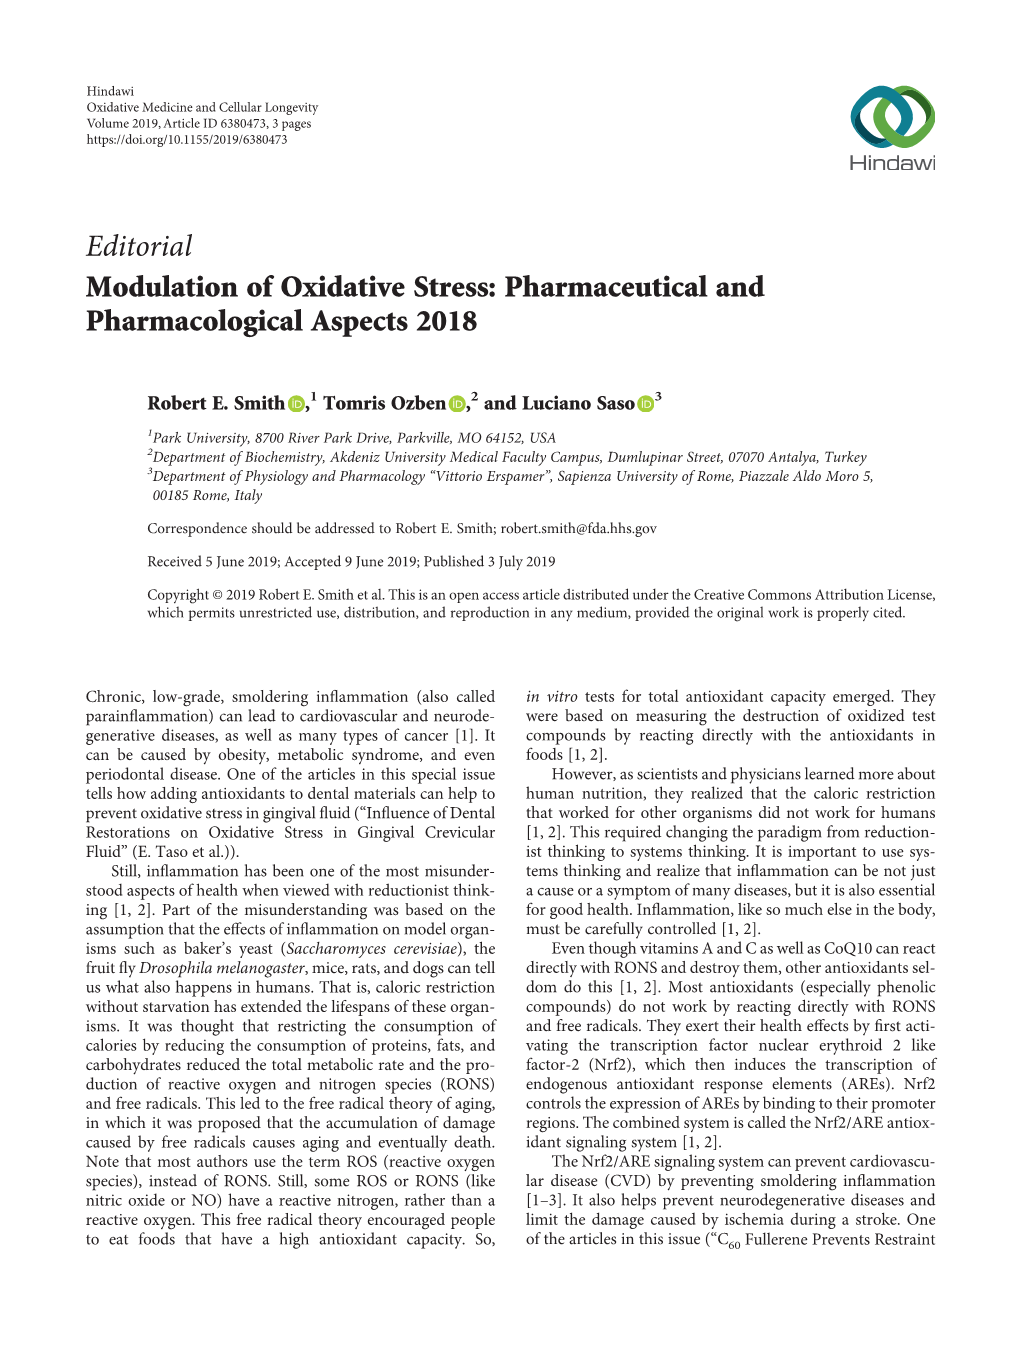 Editorial Modulation of Oxidative Stress: Pharmaceutical and Pharmacological Aspects 2018